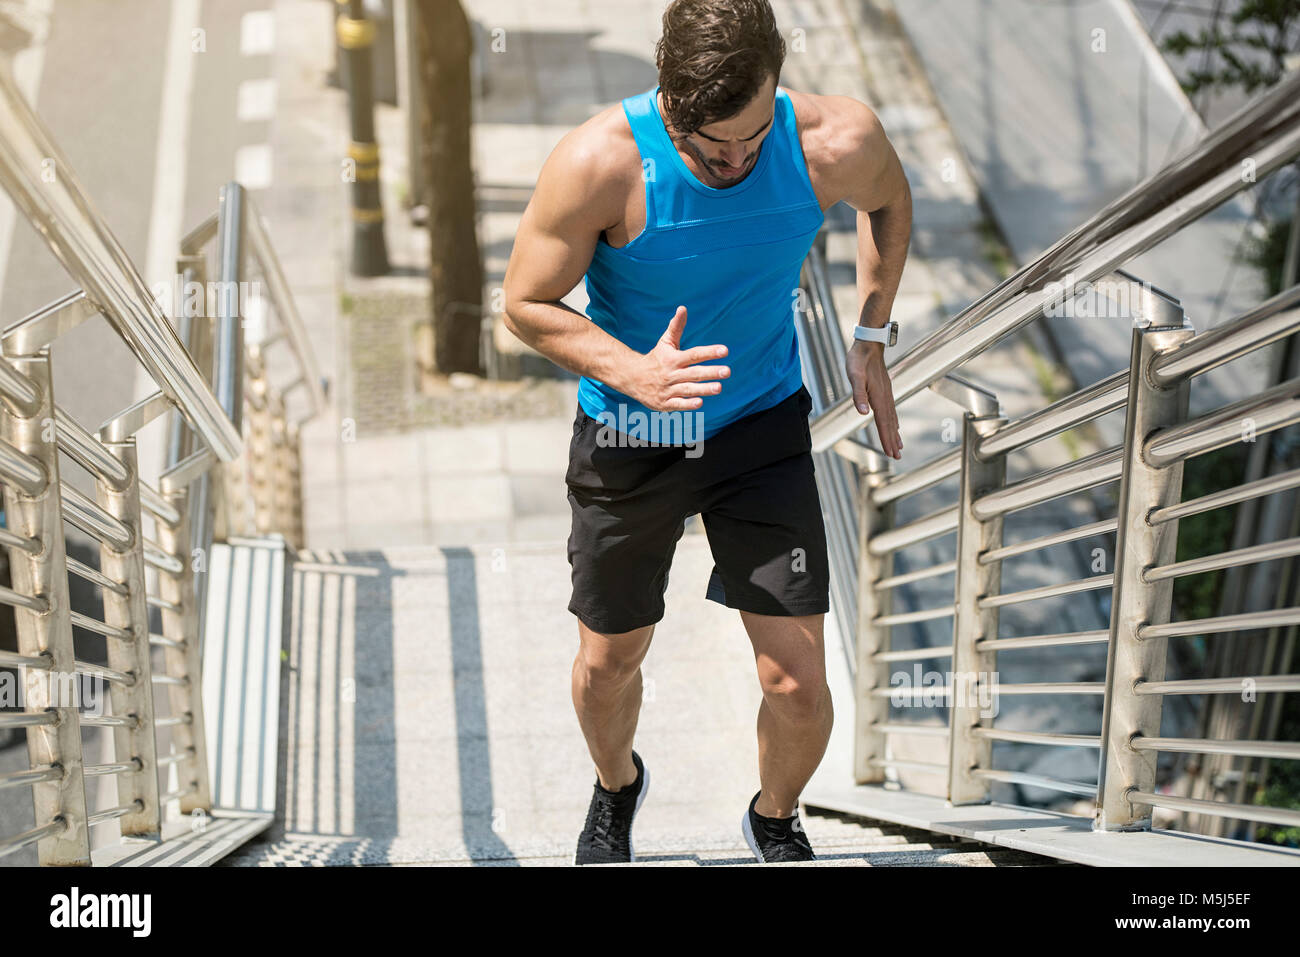 Man in blue fitness shirt running upstairs in city Stock Photo